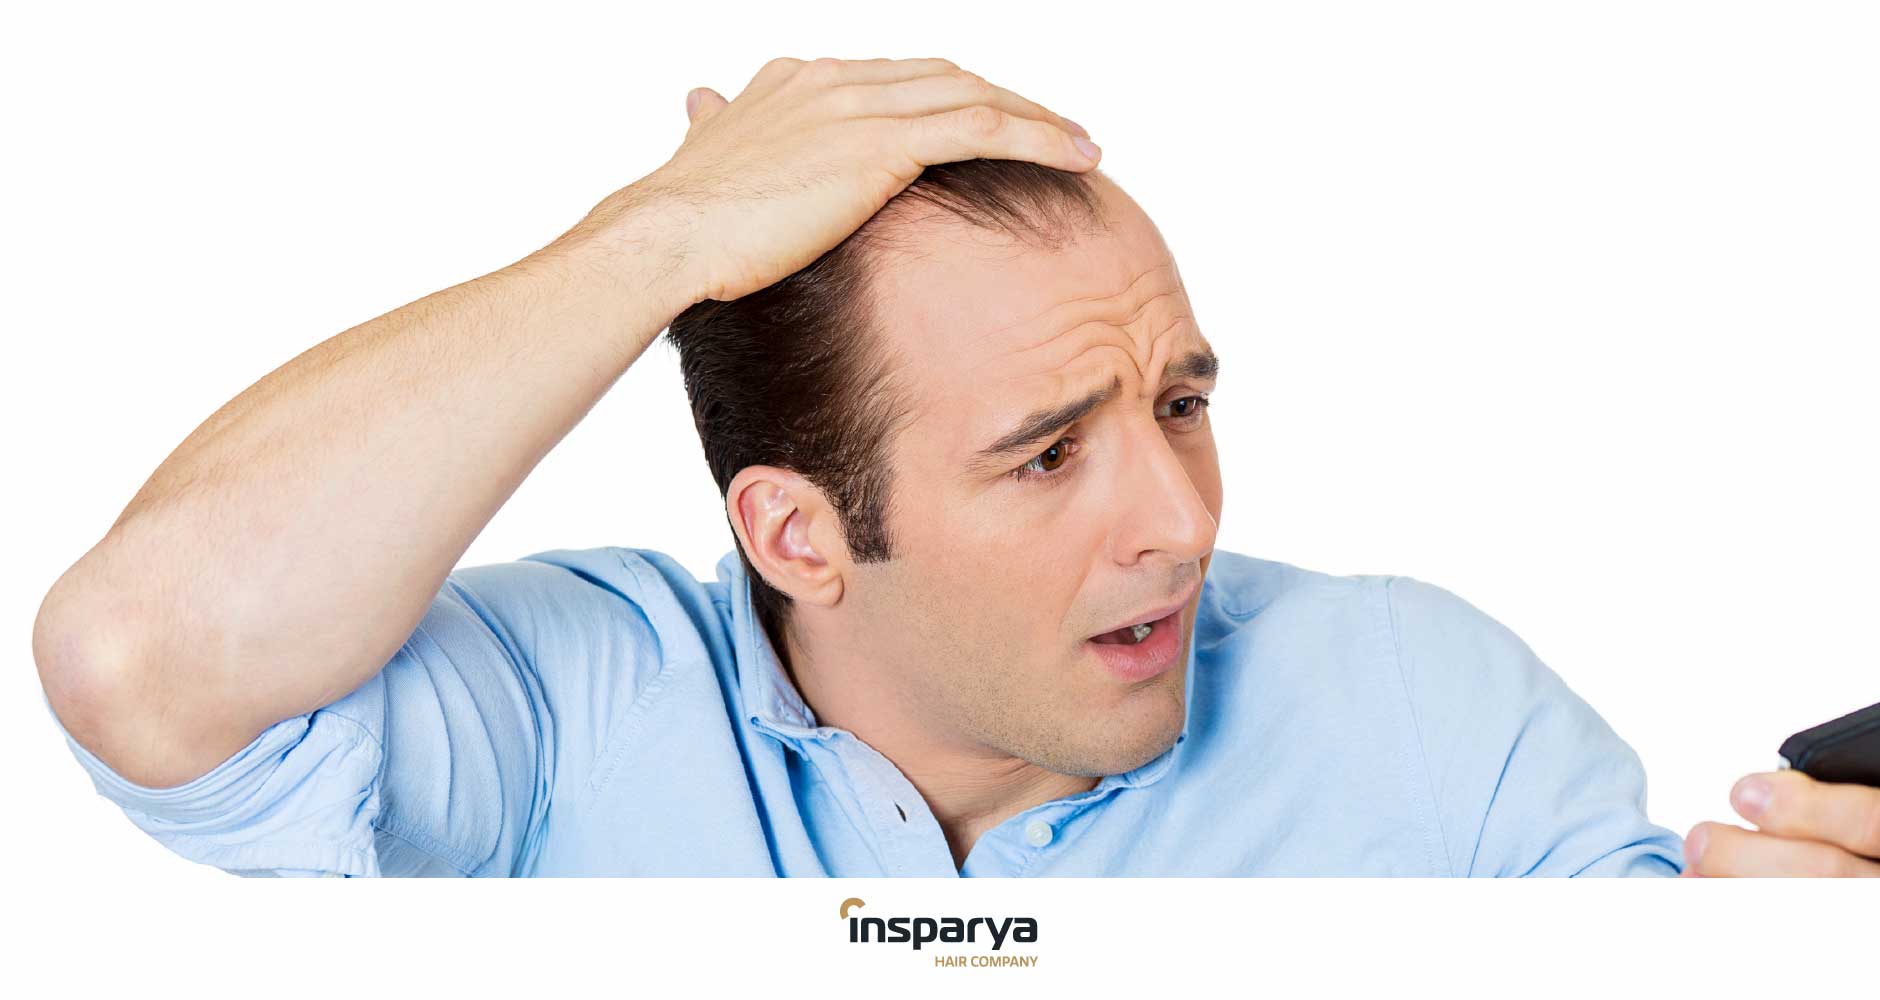 Are you affected by hair loss?